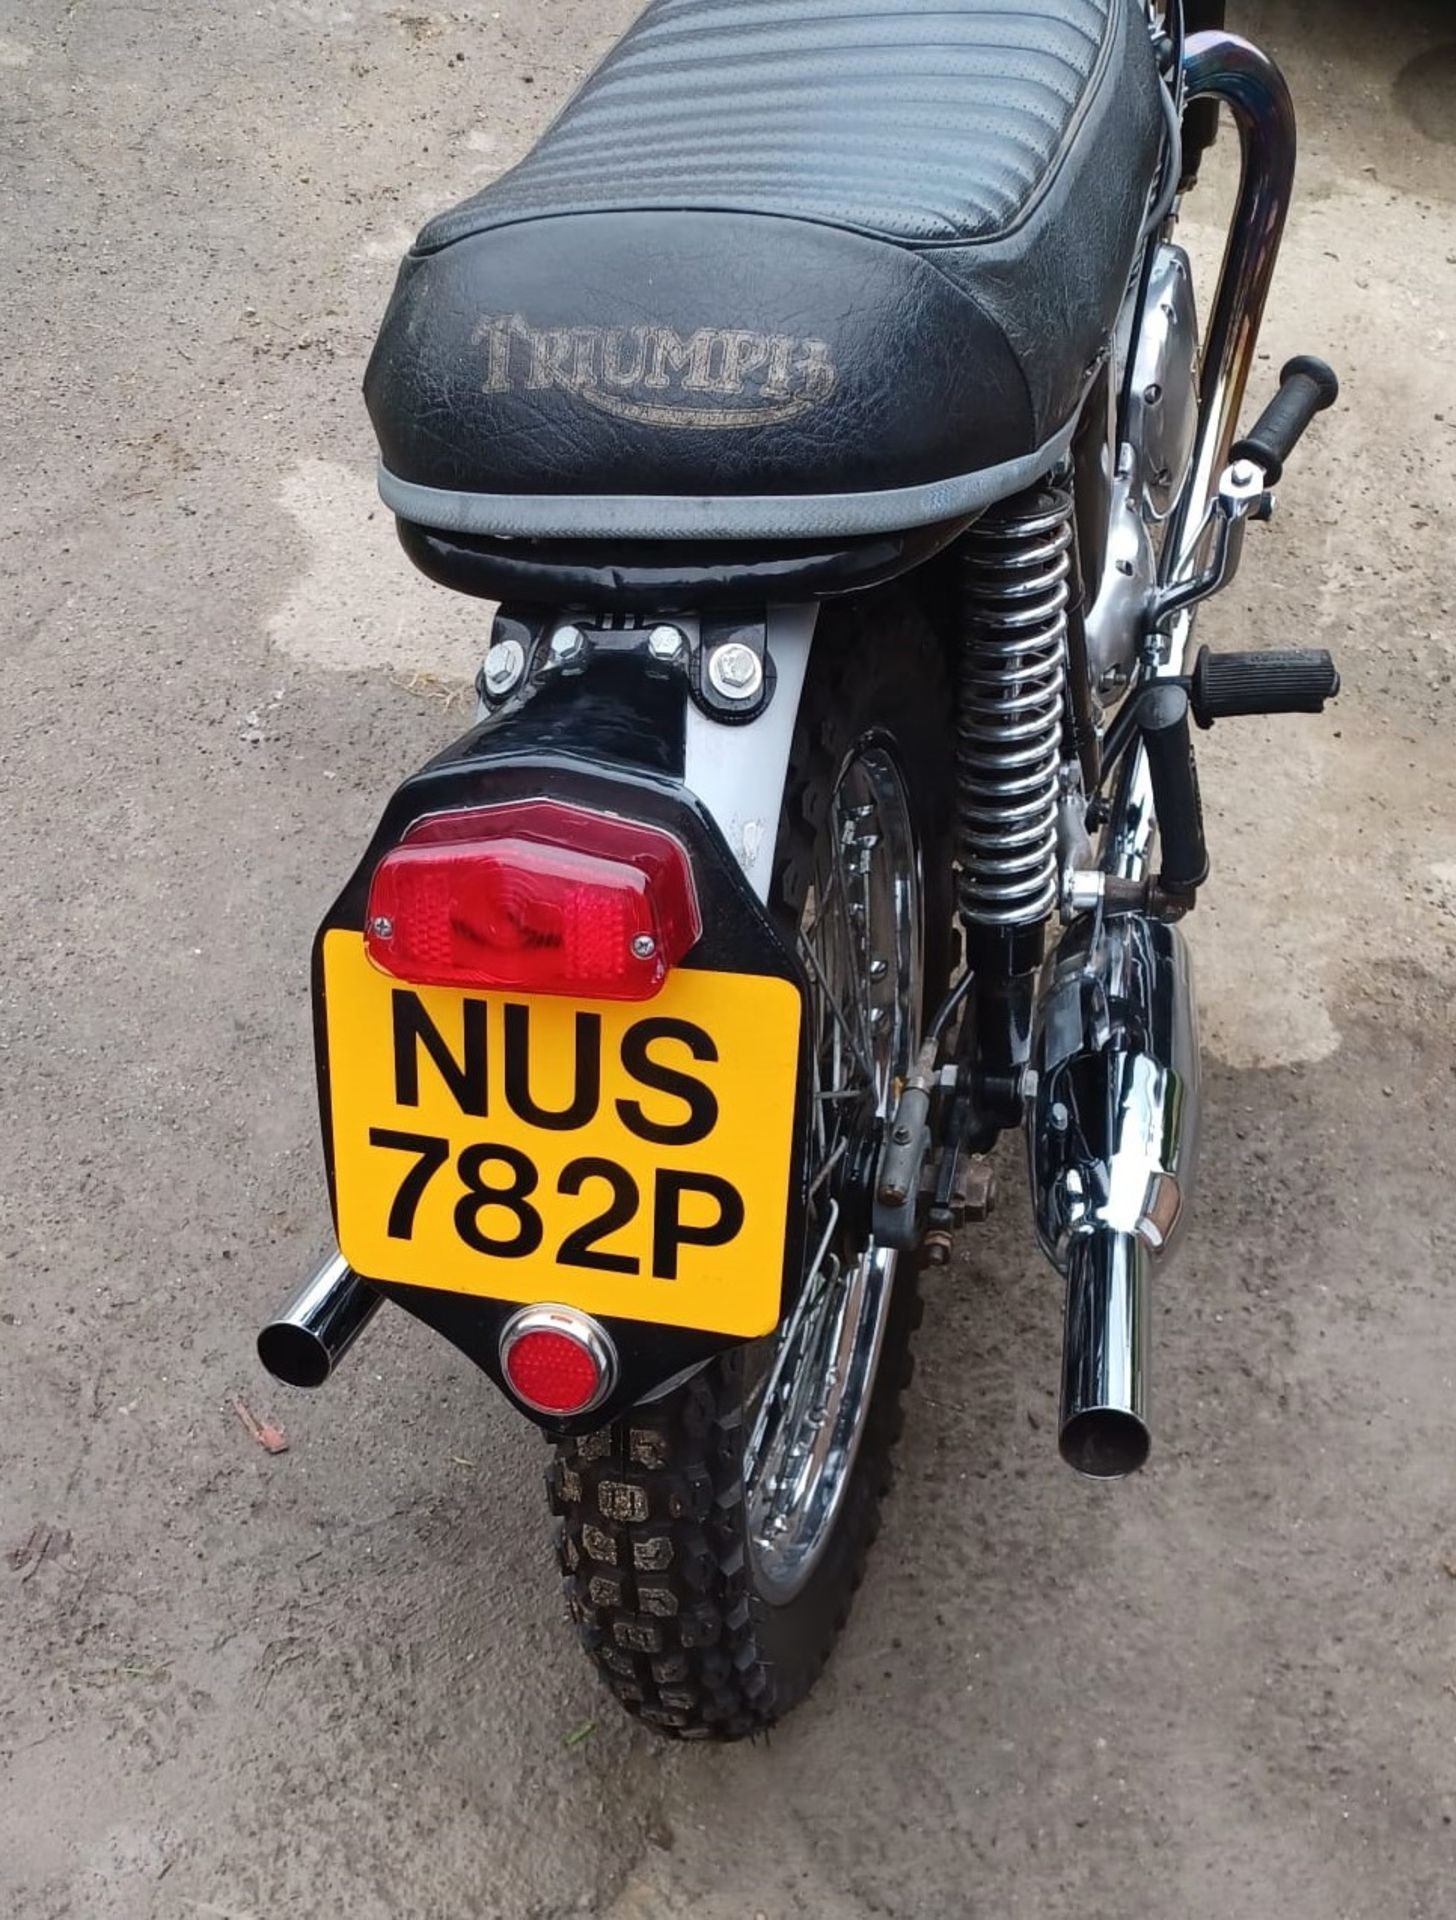 1976 TRIUMPH T21 TRIALS Registration Number: NUS 782P Frame Number: 3TA1197 Recorded Mileage: 5, - Image 6 of 13